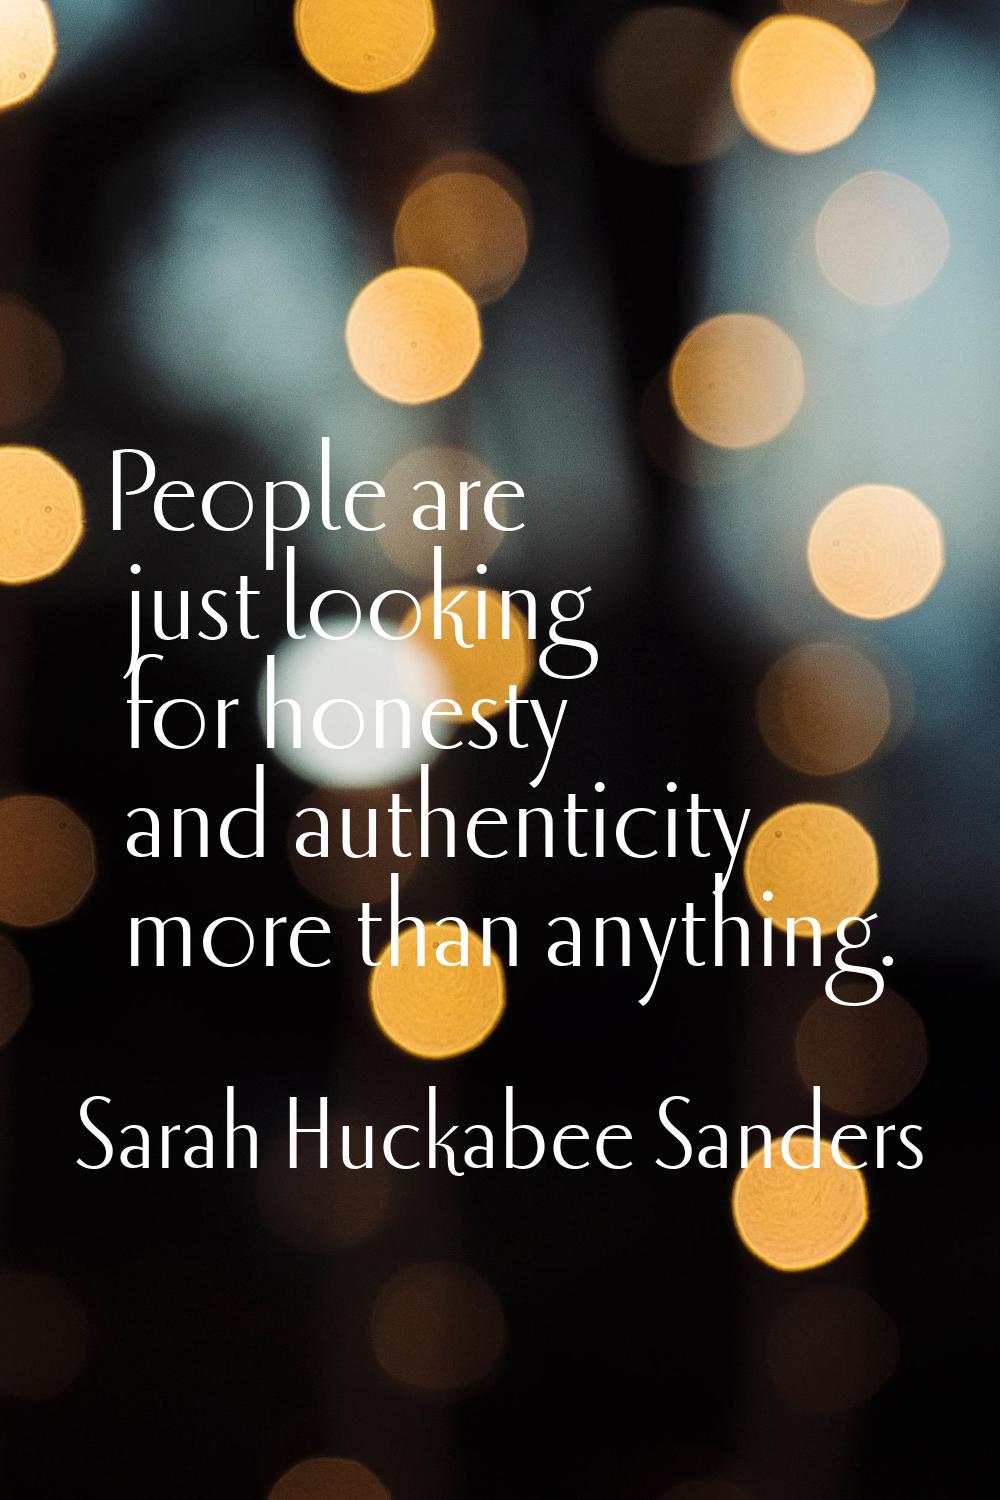 People are just looking for honesty and authenticity more than anything.